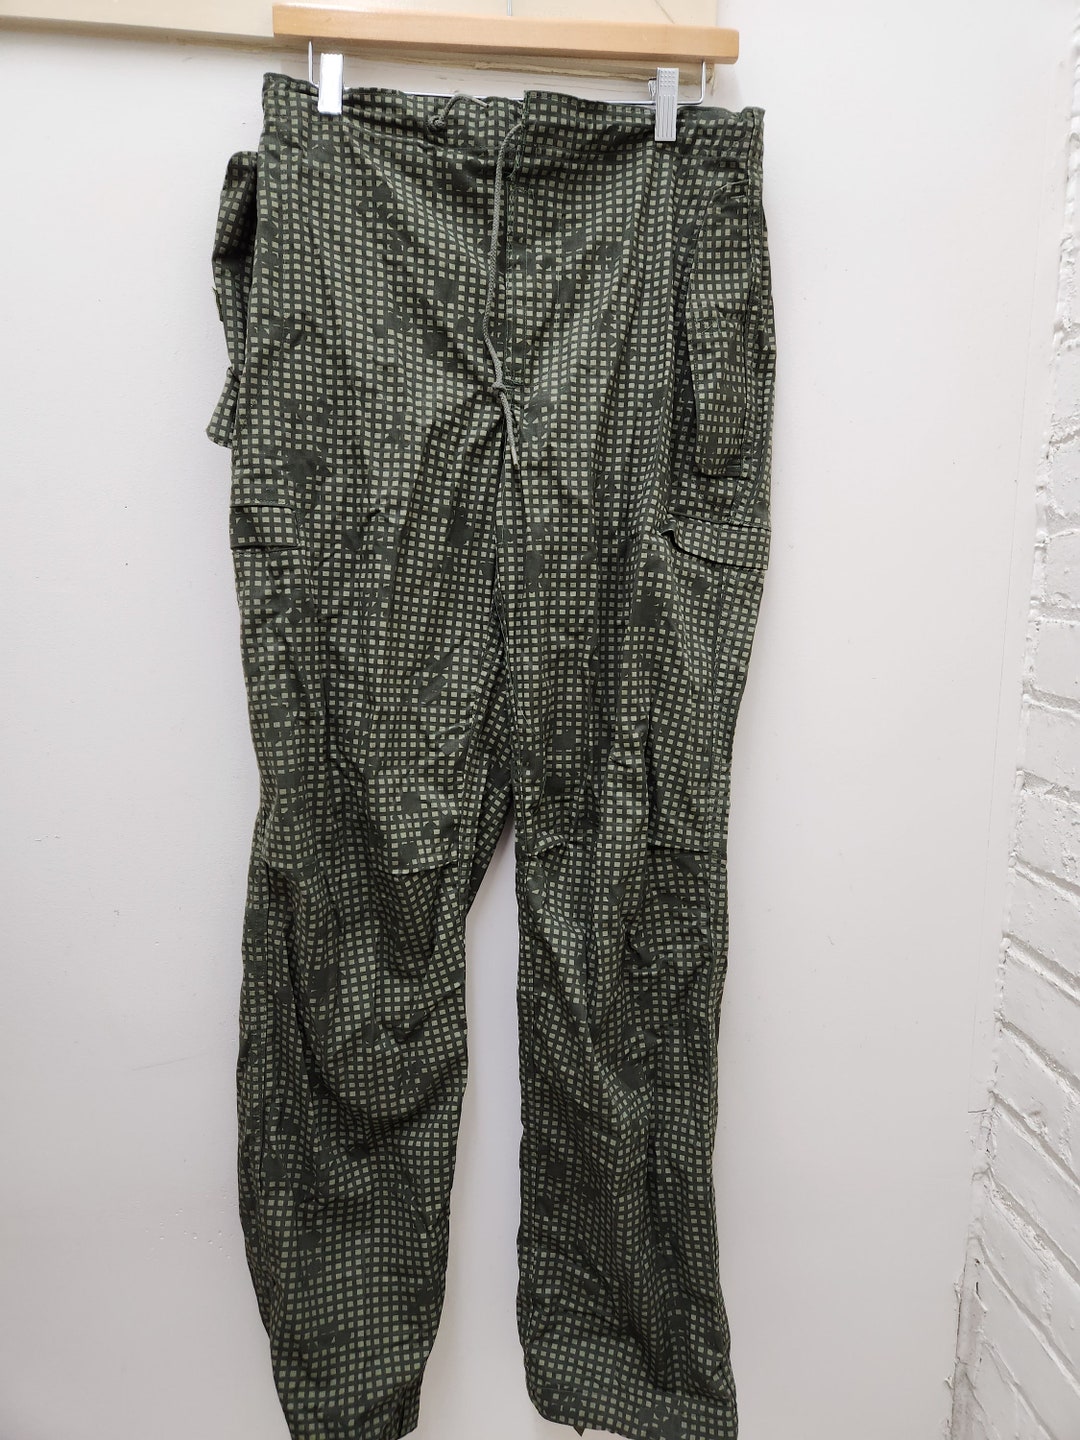 Vintage Military Issued Desert Nite Camo Trousers-xsl - Etsy